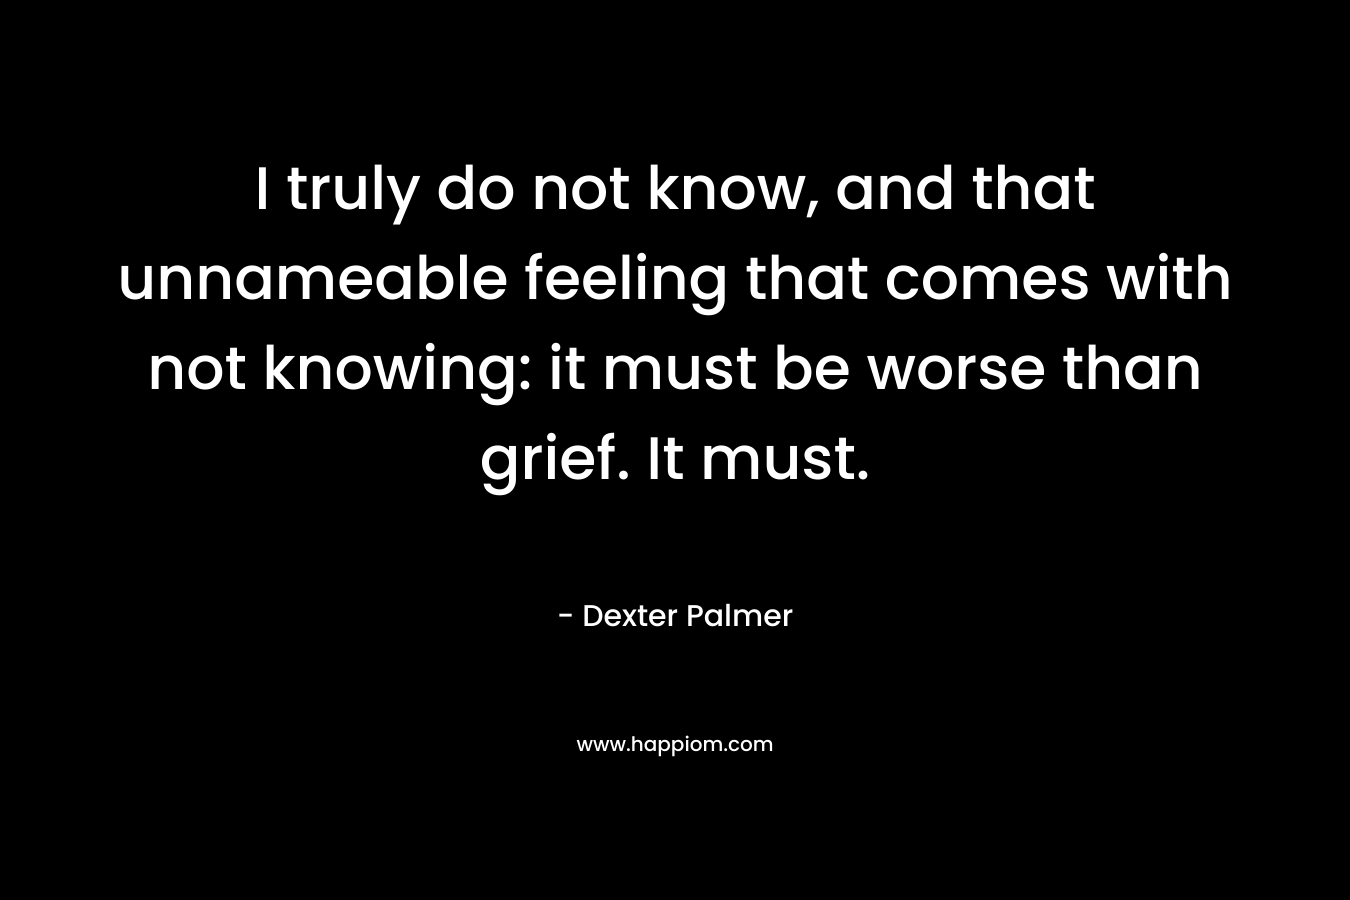 I truly do not know, and that unnameable feeling that comes with not knowing: it must be worse than grief. It must.